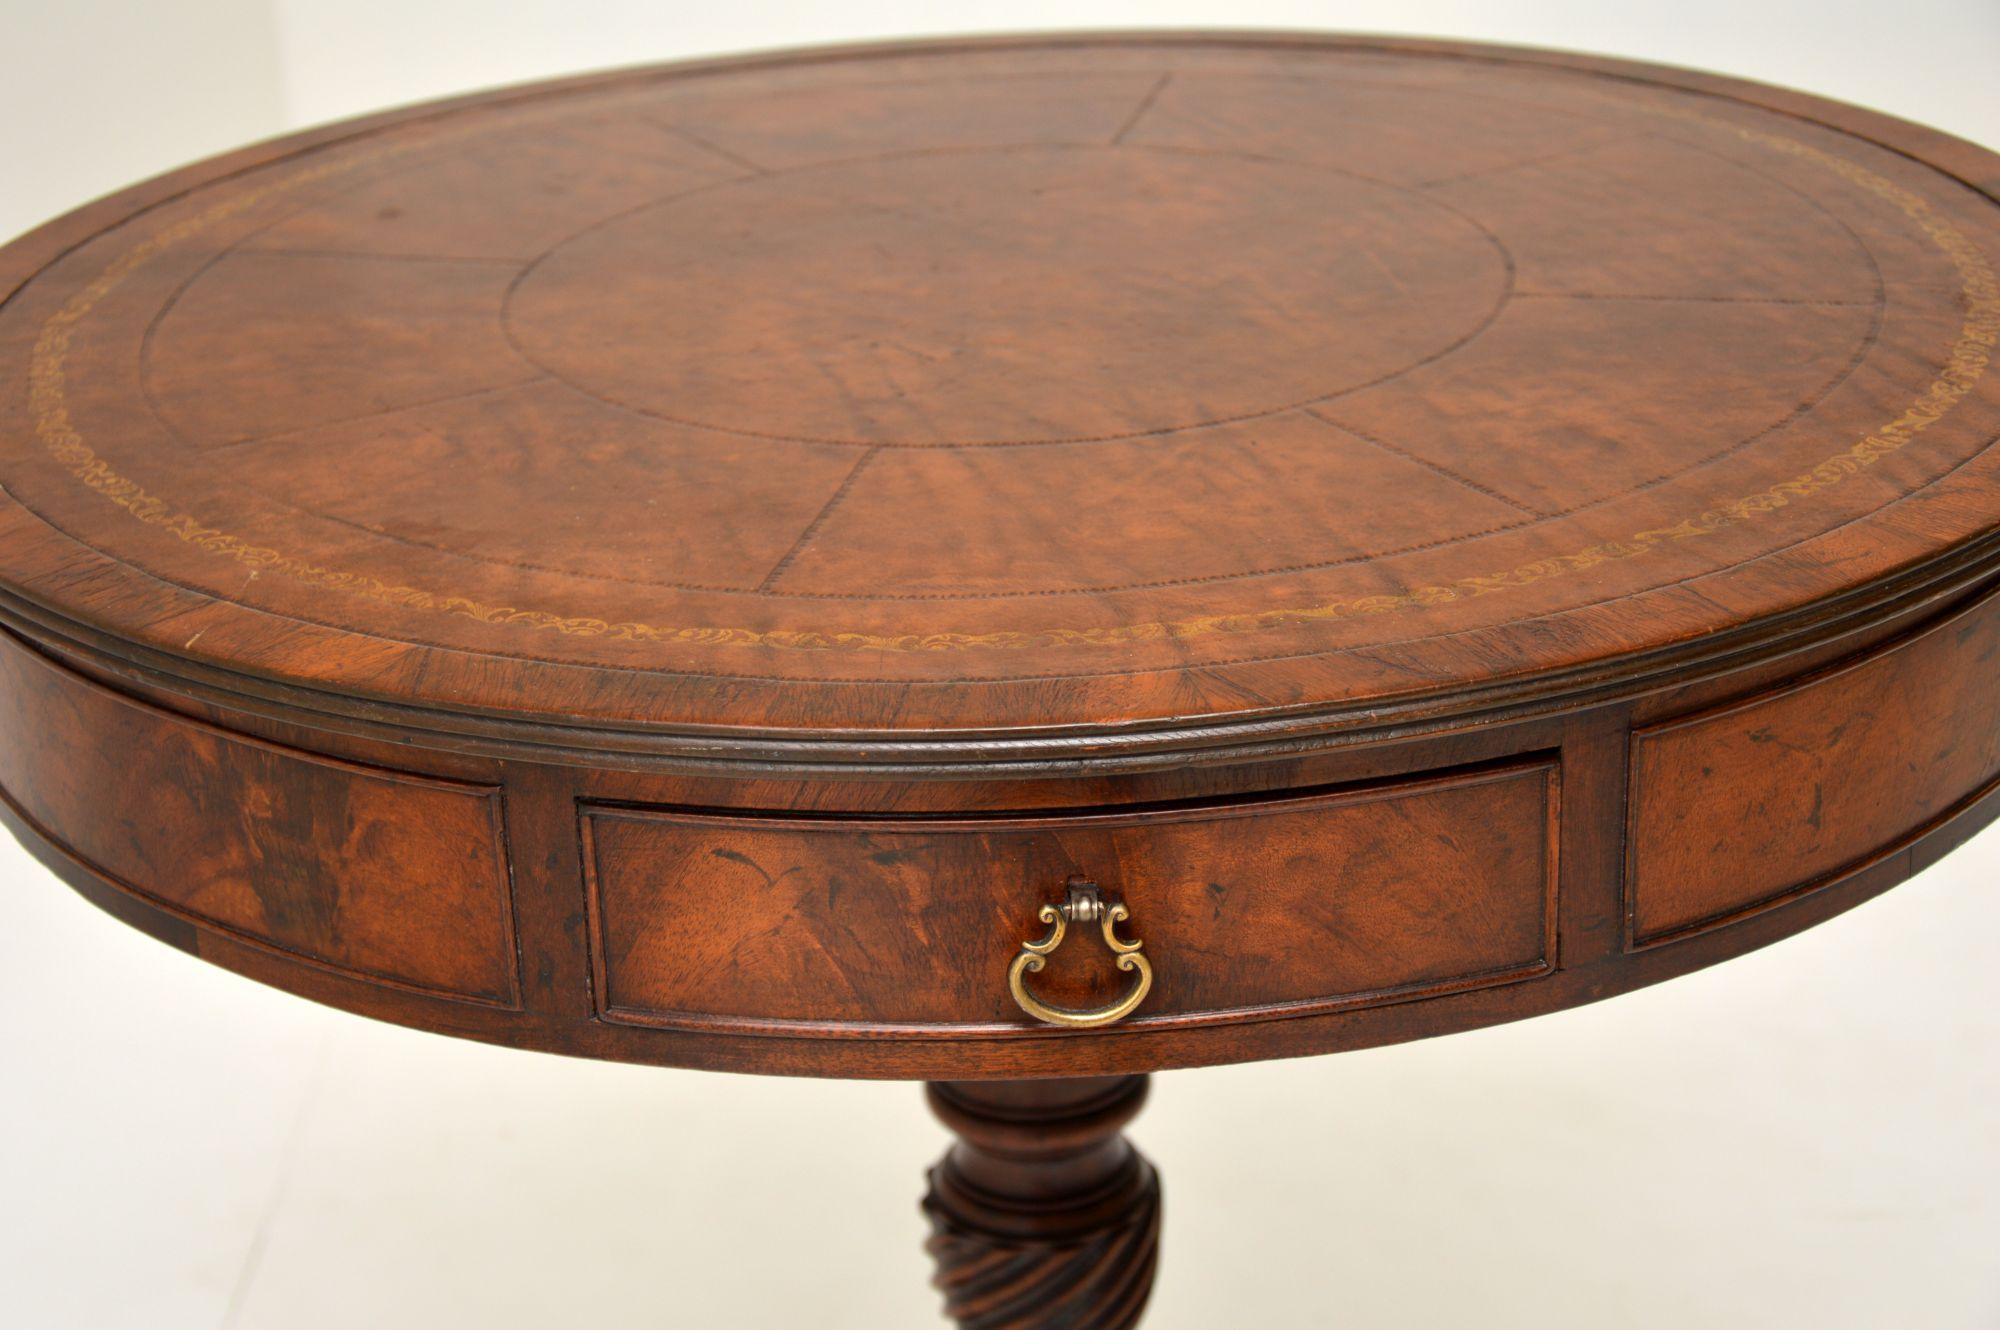 Early 20th Century Antique Mahogany Leather Top Revolving Drum Table